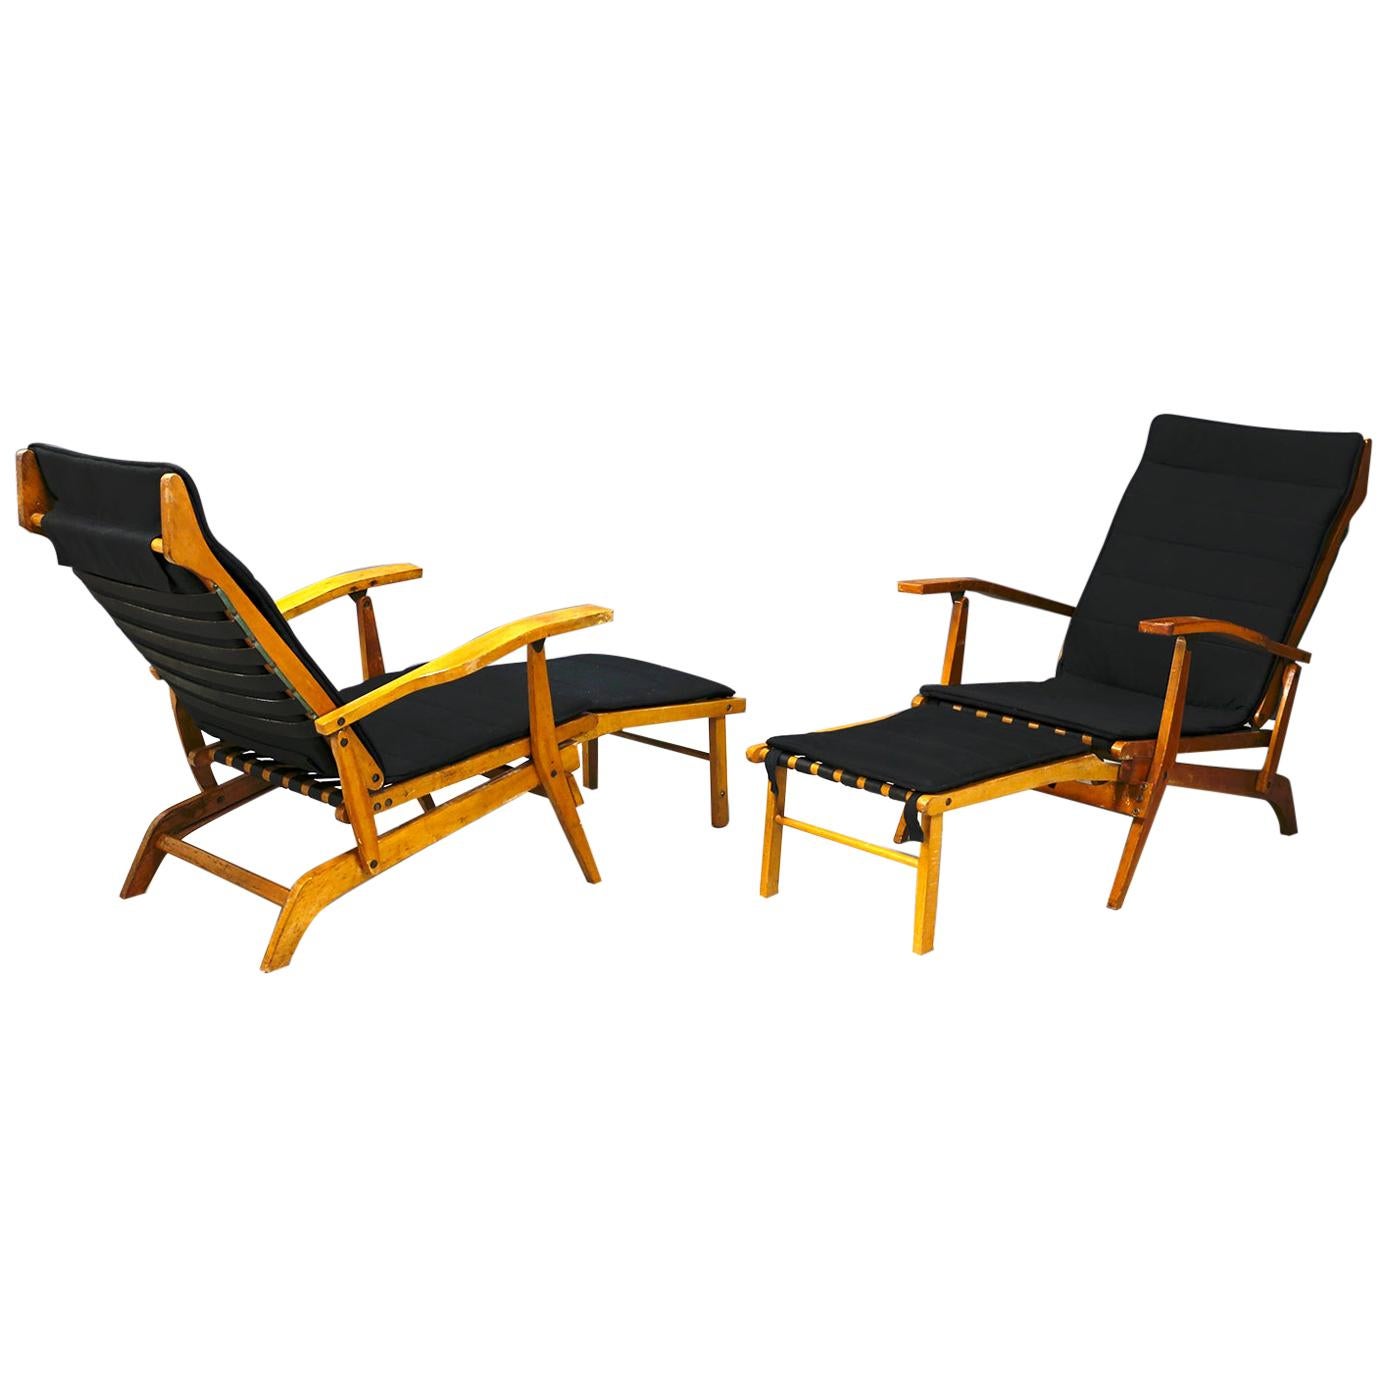 Pair of Midcentury Lounge Chairs Attributed to Studio BBPR from 1950s